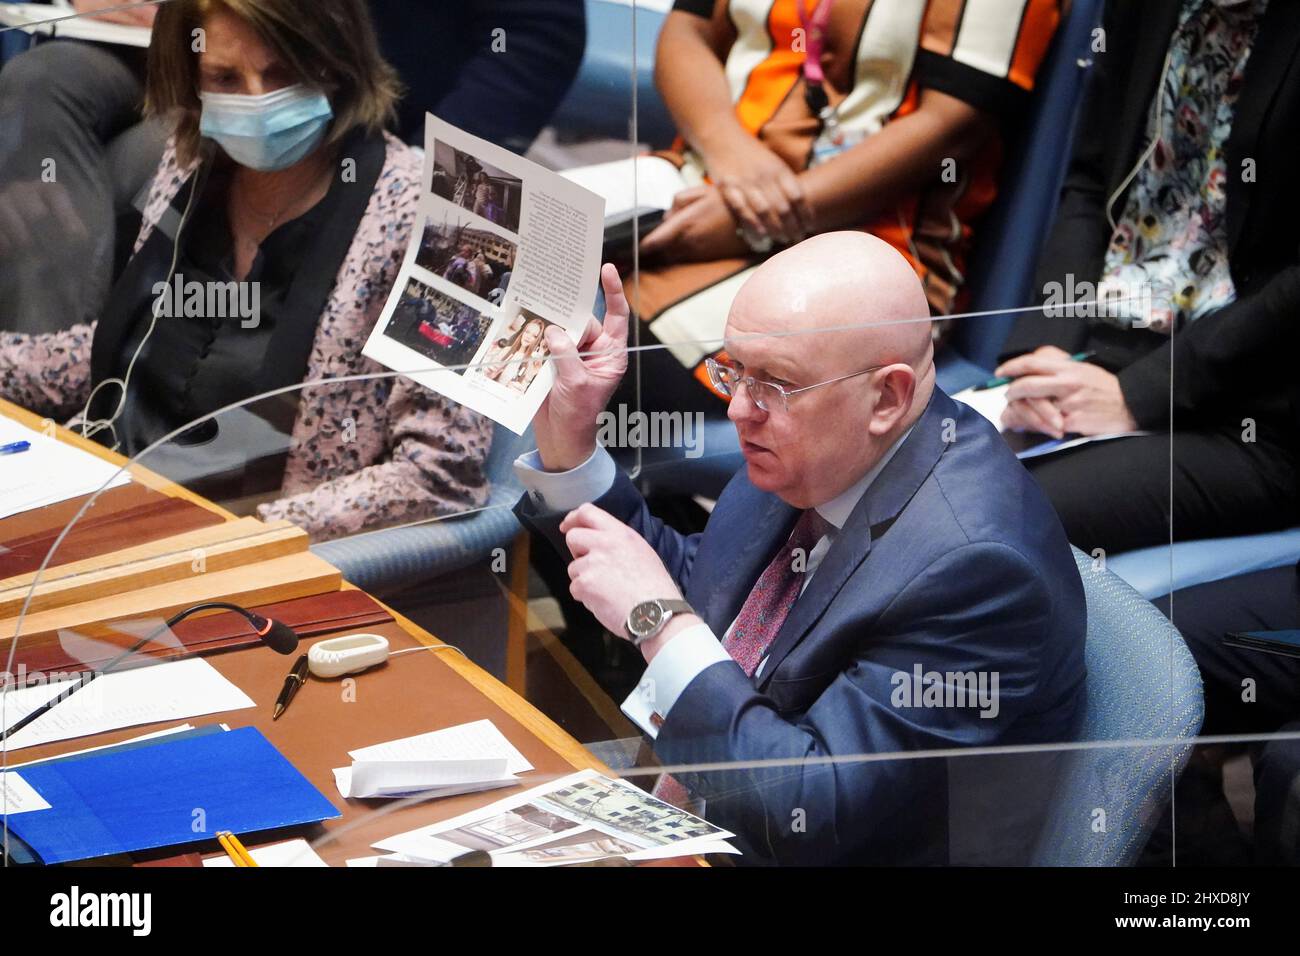 Russia's Ambassador to the U.N. Vasily Nebenzya shows pictures during the United Nations Security Council meeting on Threats to International Peace and Security, following Russia's invasion of Ukraine, in New York City, U.S. March 11, 2022. REUTERS/Carlo Allegri Stock Photo